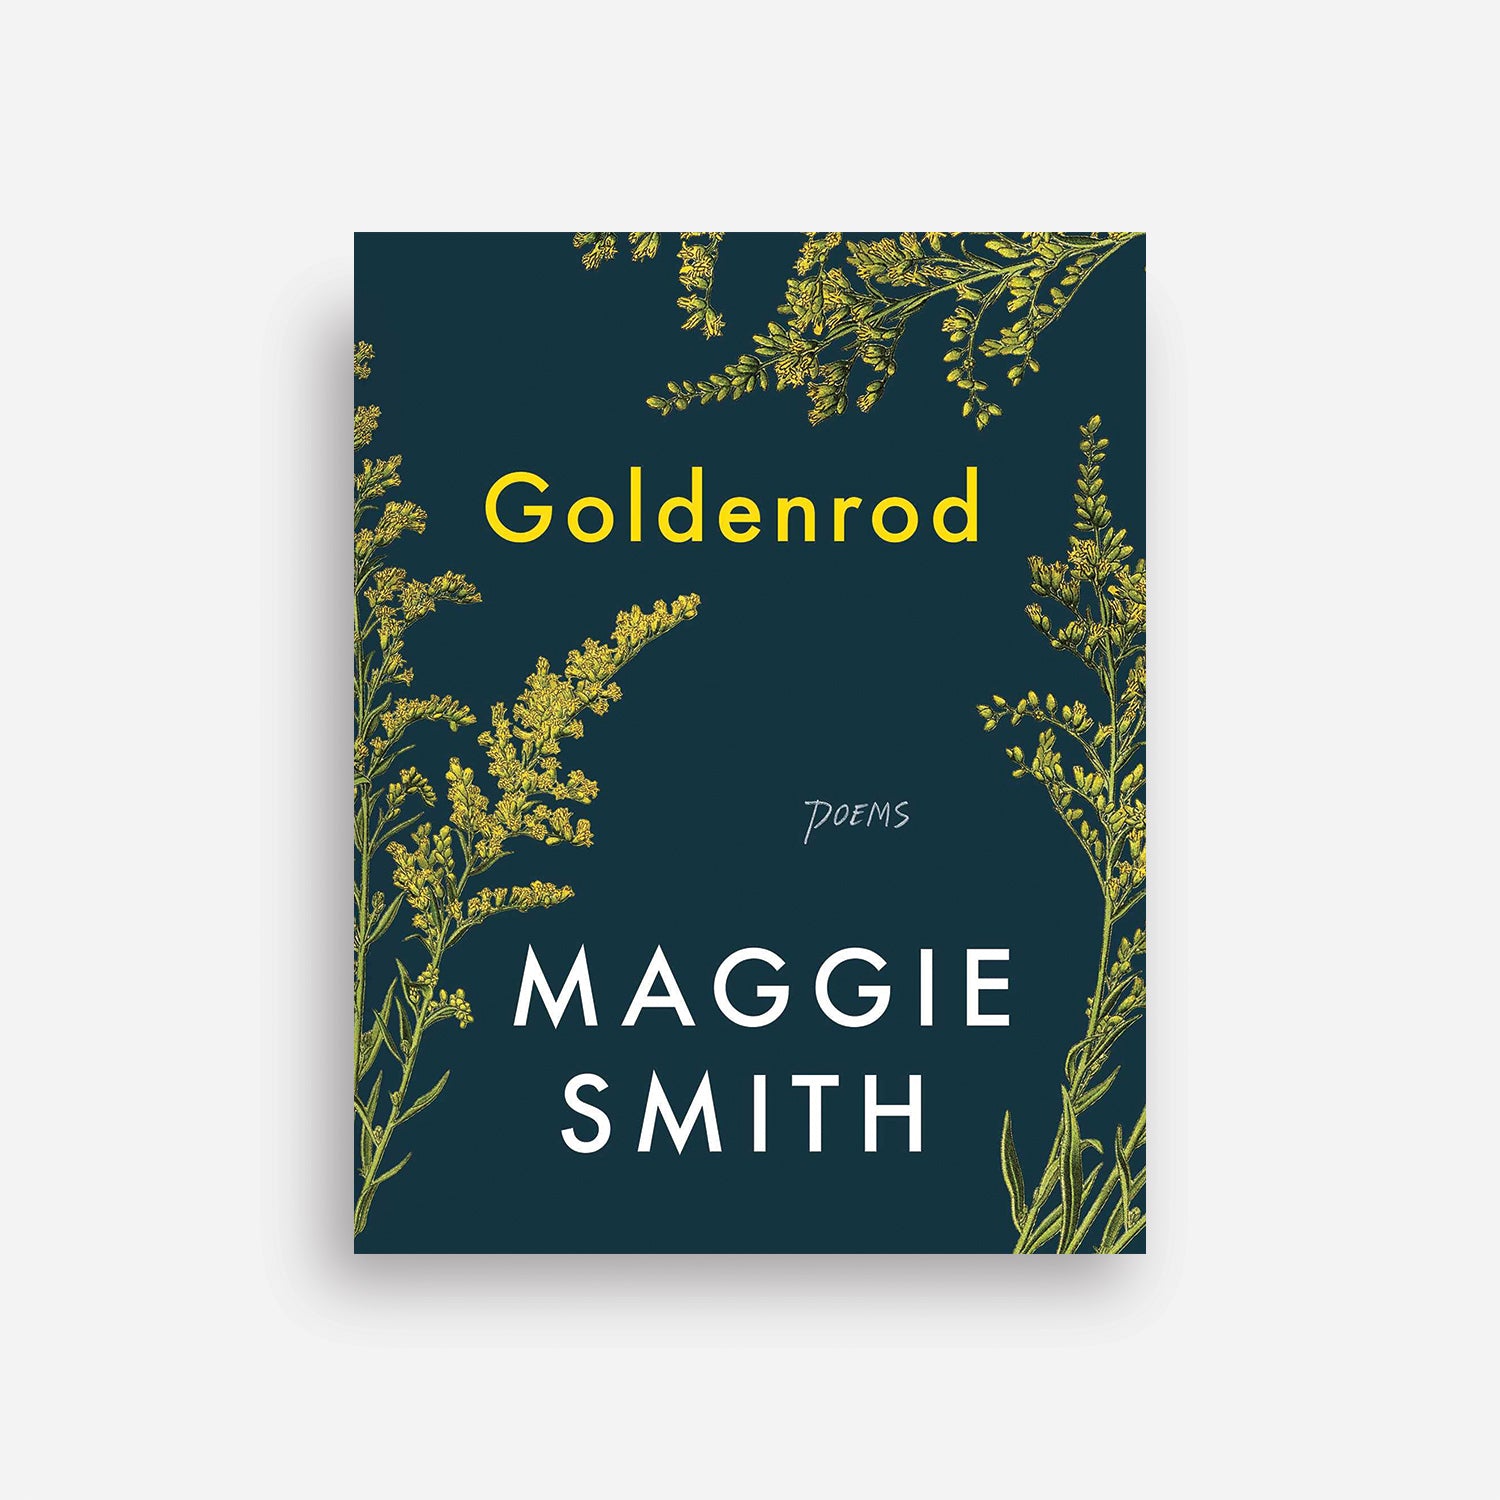 Goldenrod by Maggie Smith book cover